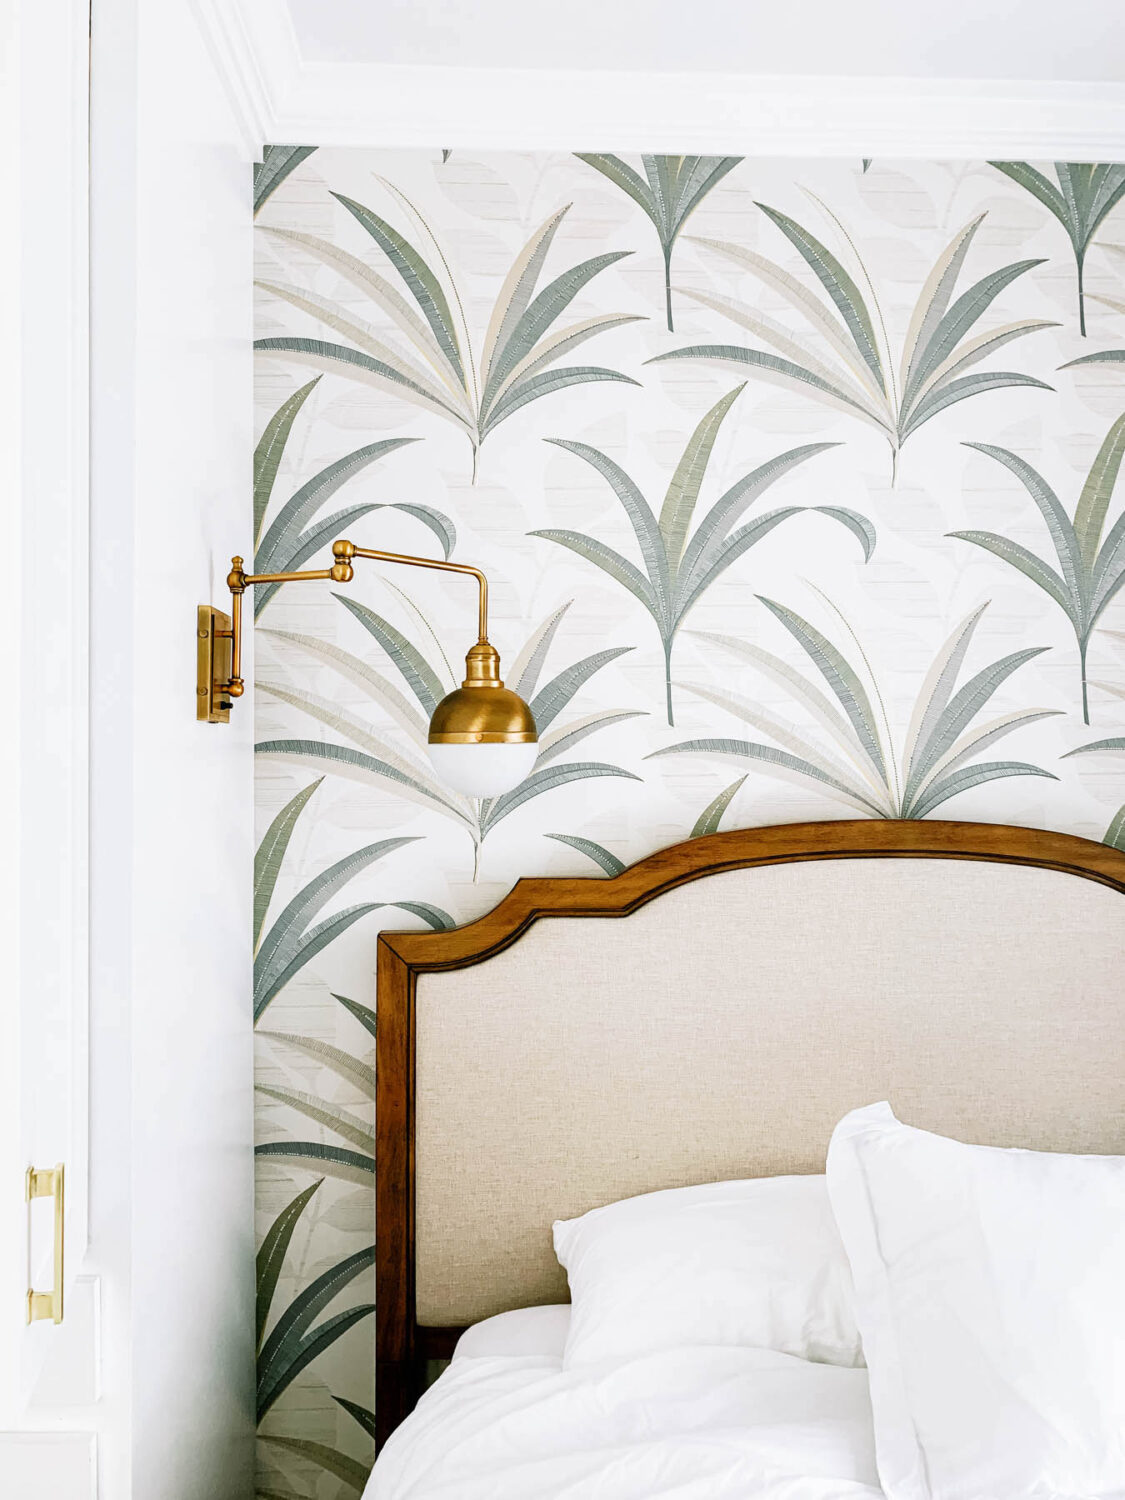 Part of a luxurious bedroom showing a portion of an upholstered bed with a wooden frame, against a backdrop of tropical leaf-patterned wallpaper, complemented by a brass wall-mounted reading light - 10 Easy Styling tips for a Luxury Bedroom makeover -